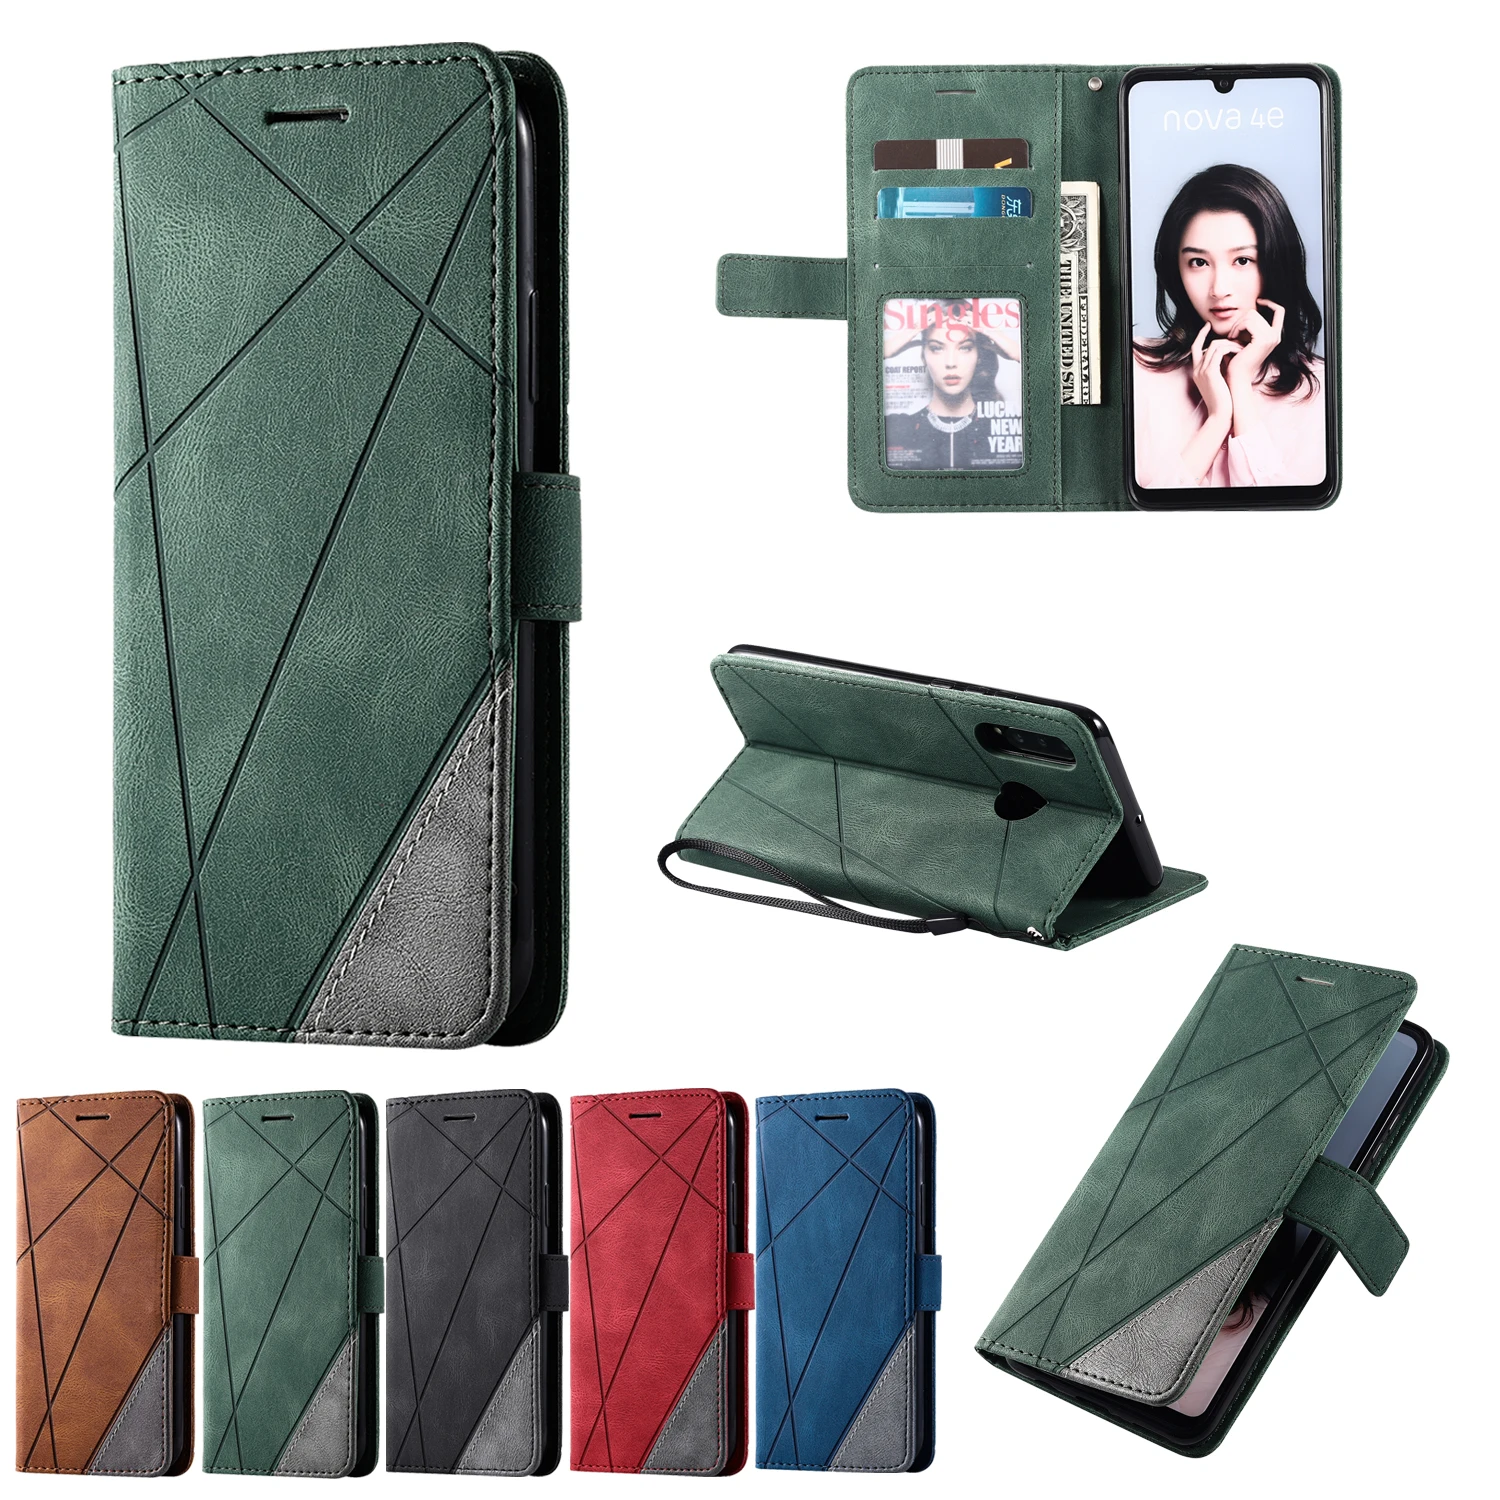 

Leather Case For Xiaomi Redmi Noet 7 8 9 10 7A 8A K20 K30 K40 Pro Max 8T 9S 10S 10X 9 Prime 9A 9AT 9i 9C NFC 9T 10 Phone Cover